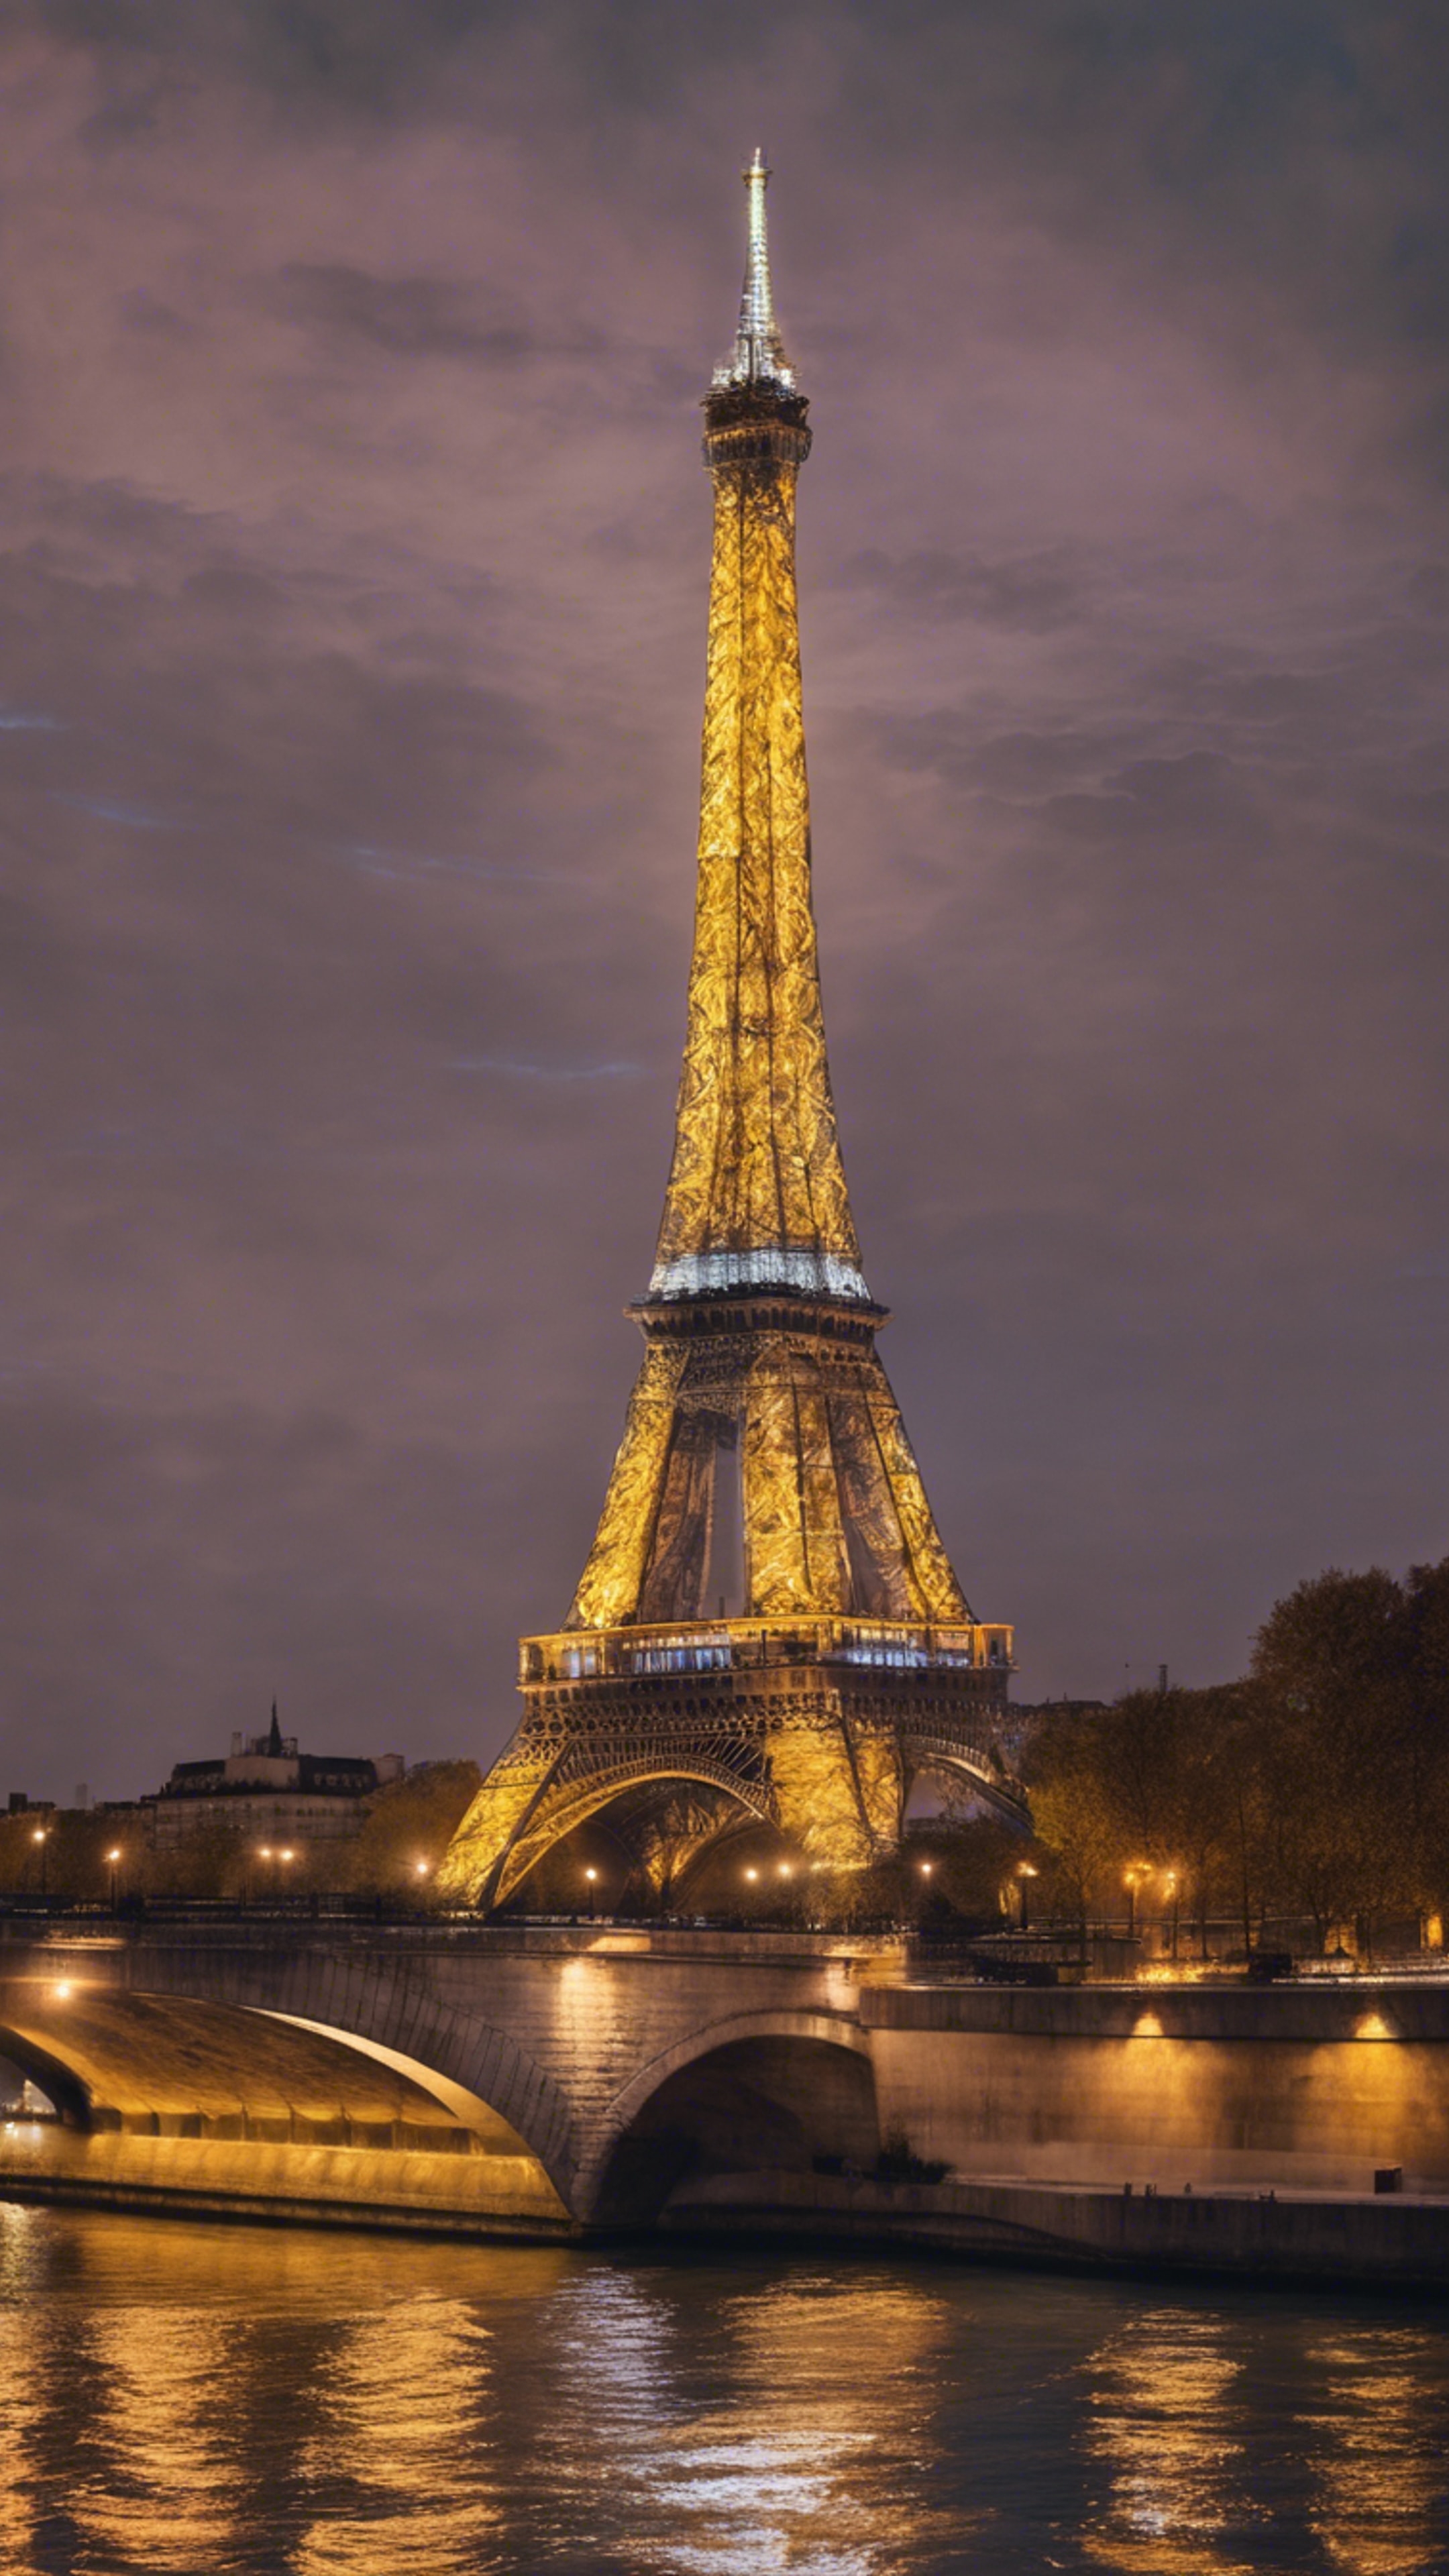 Eiffel tower illuminated against the Paris skyline at night, reflecting in the smooth waters of the river Seine. Divar kağızı[bfd7e83086d14adeb14c]